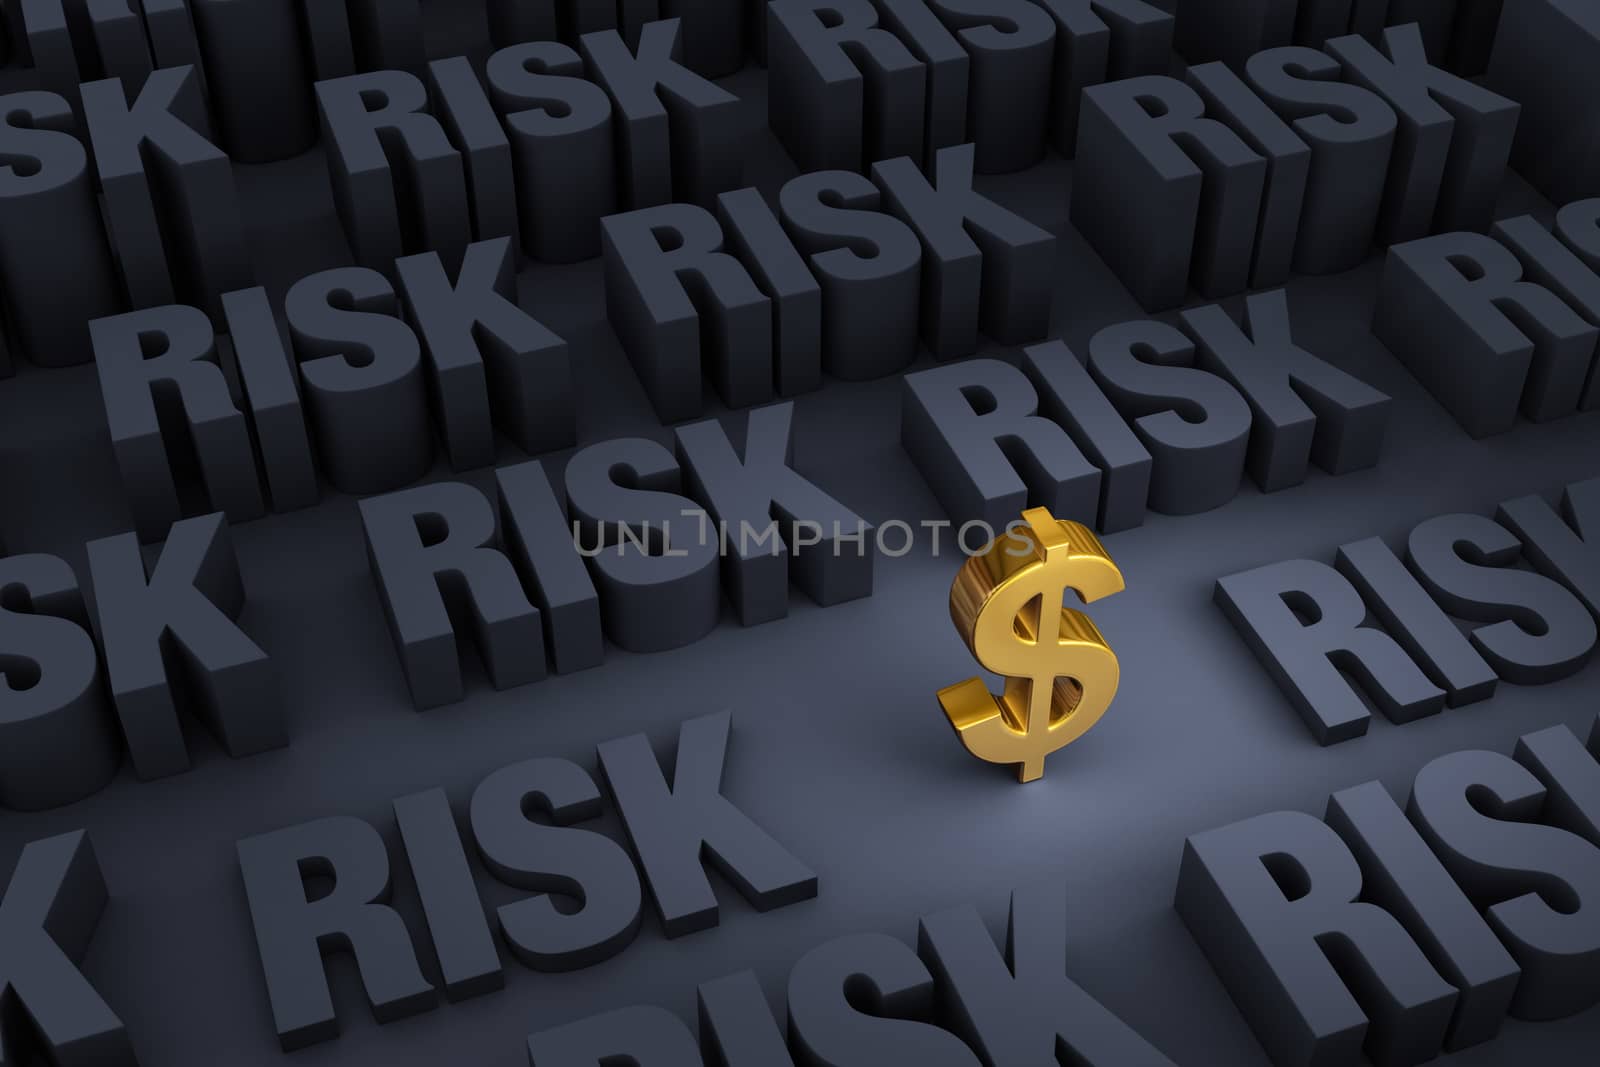 A small gold dollar sign stands out in a dark background of gray "RISK" rising up around it.